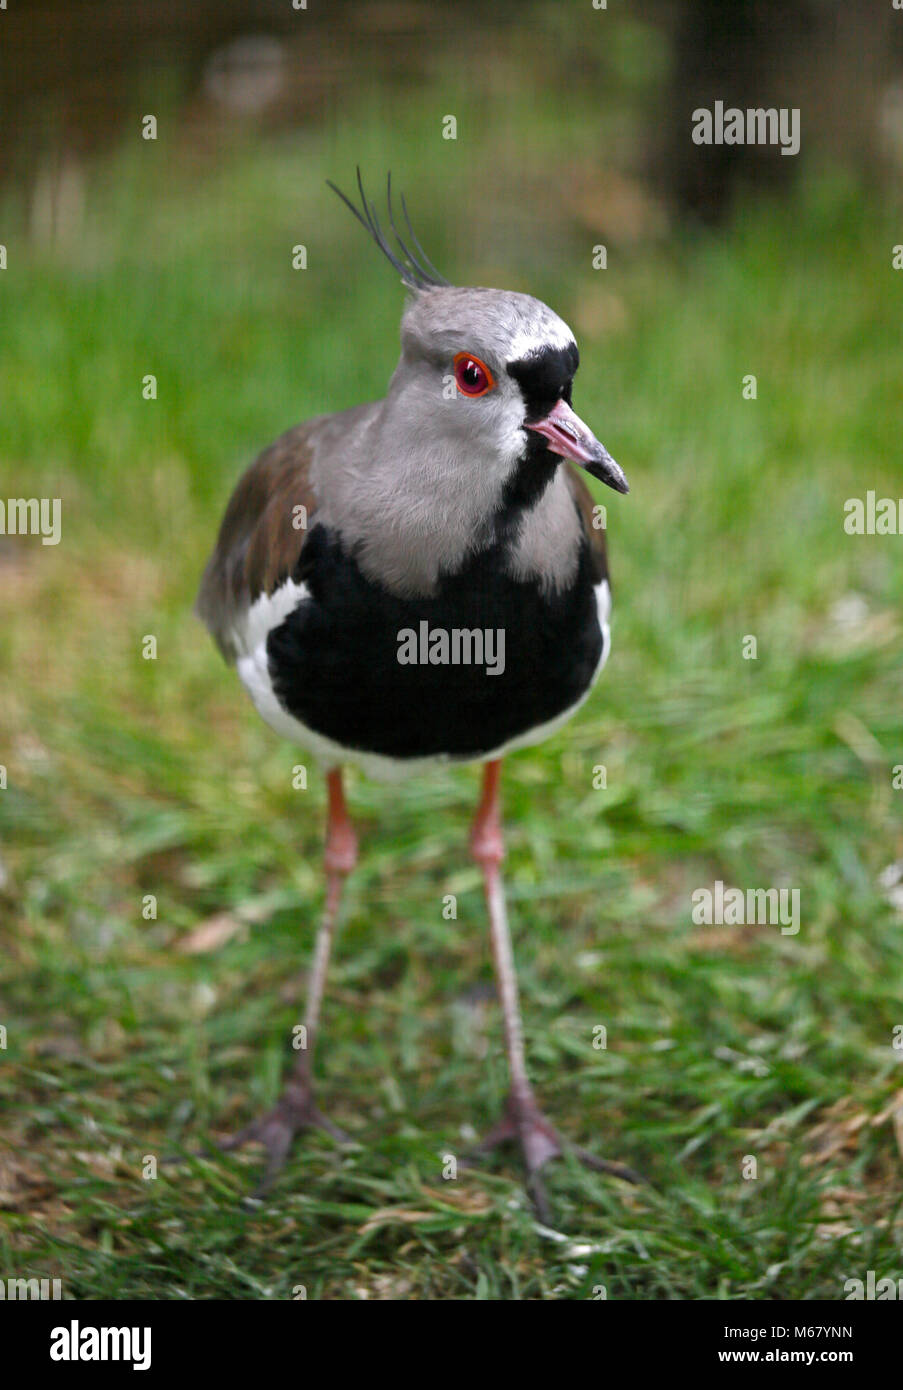 Southern Lapwing (vanellus chilensis) Stock Photo